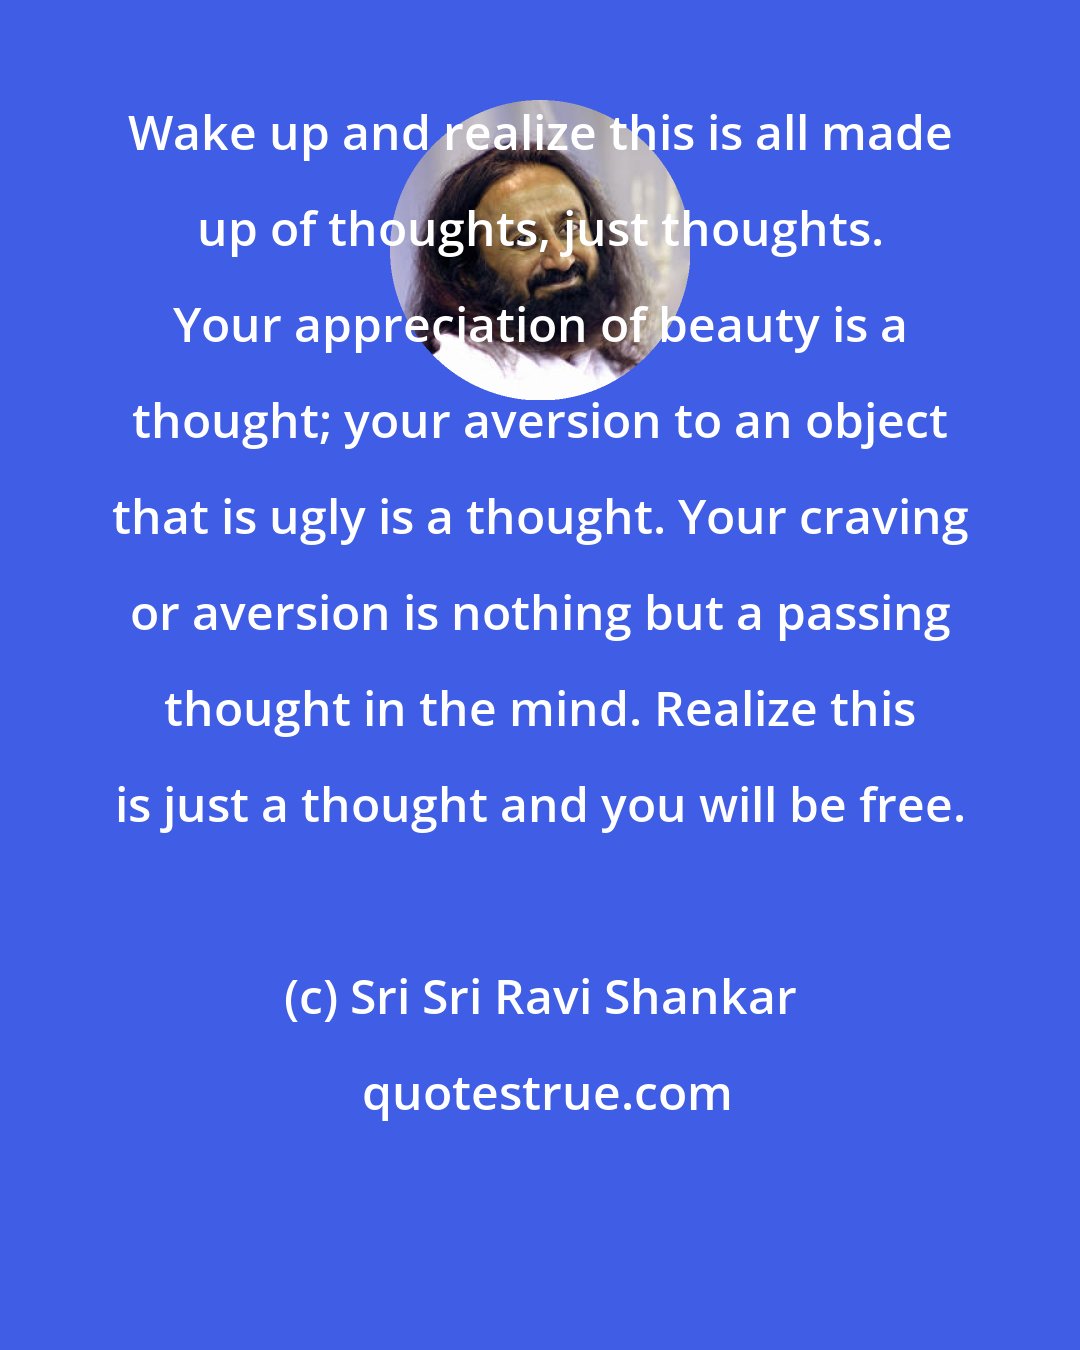 Sri Sri Ravi Shankar: Wake up and realize this is all made up of thoughts, just thoughts. Your appreciation of beauty is a thought; your aversion to an object that is ugly is a thought. Your craving or aversion is nothing but a passing thought in the mind. Realize this is just a thought and you will be free.